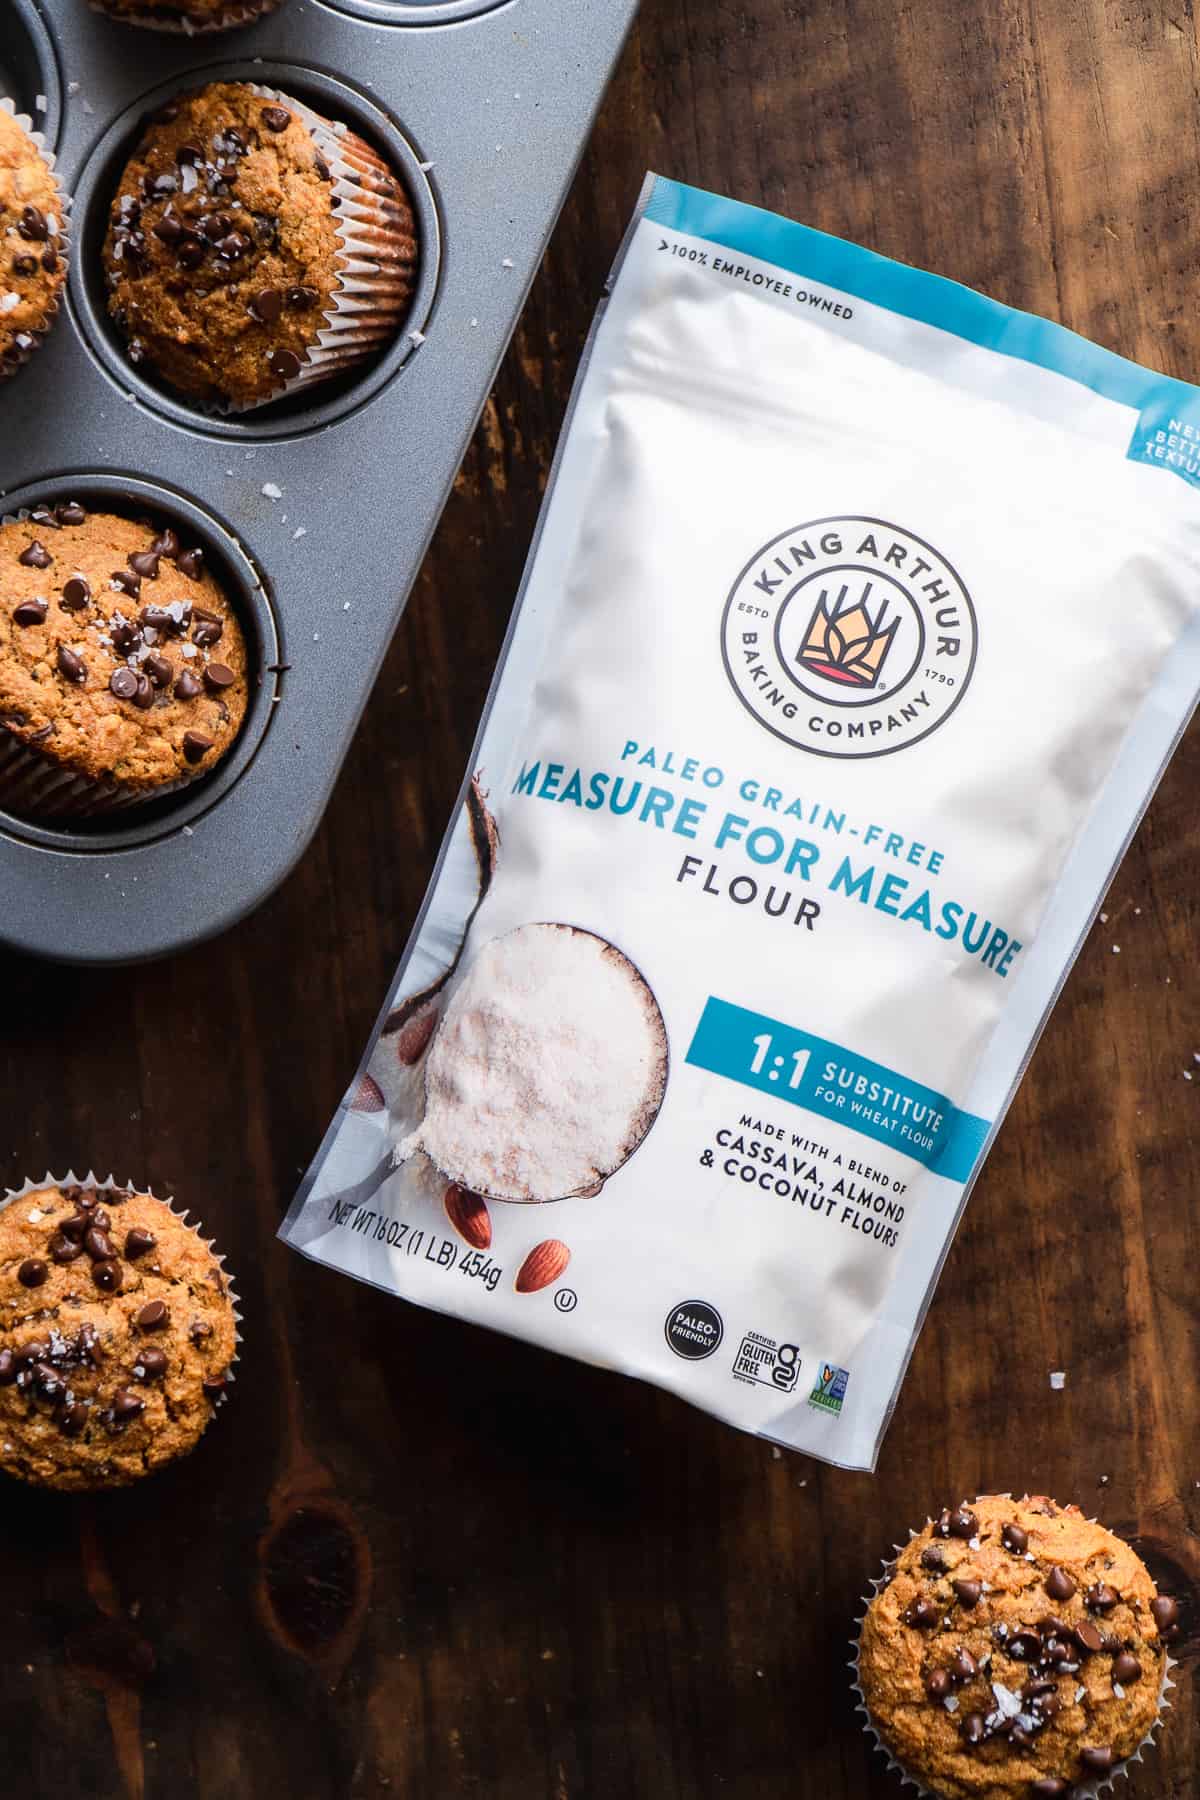 A bag of paleo flour on a wooden surface with muffins on the side.